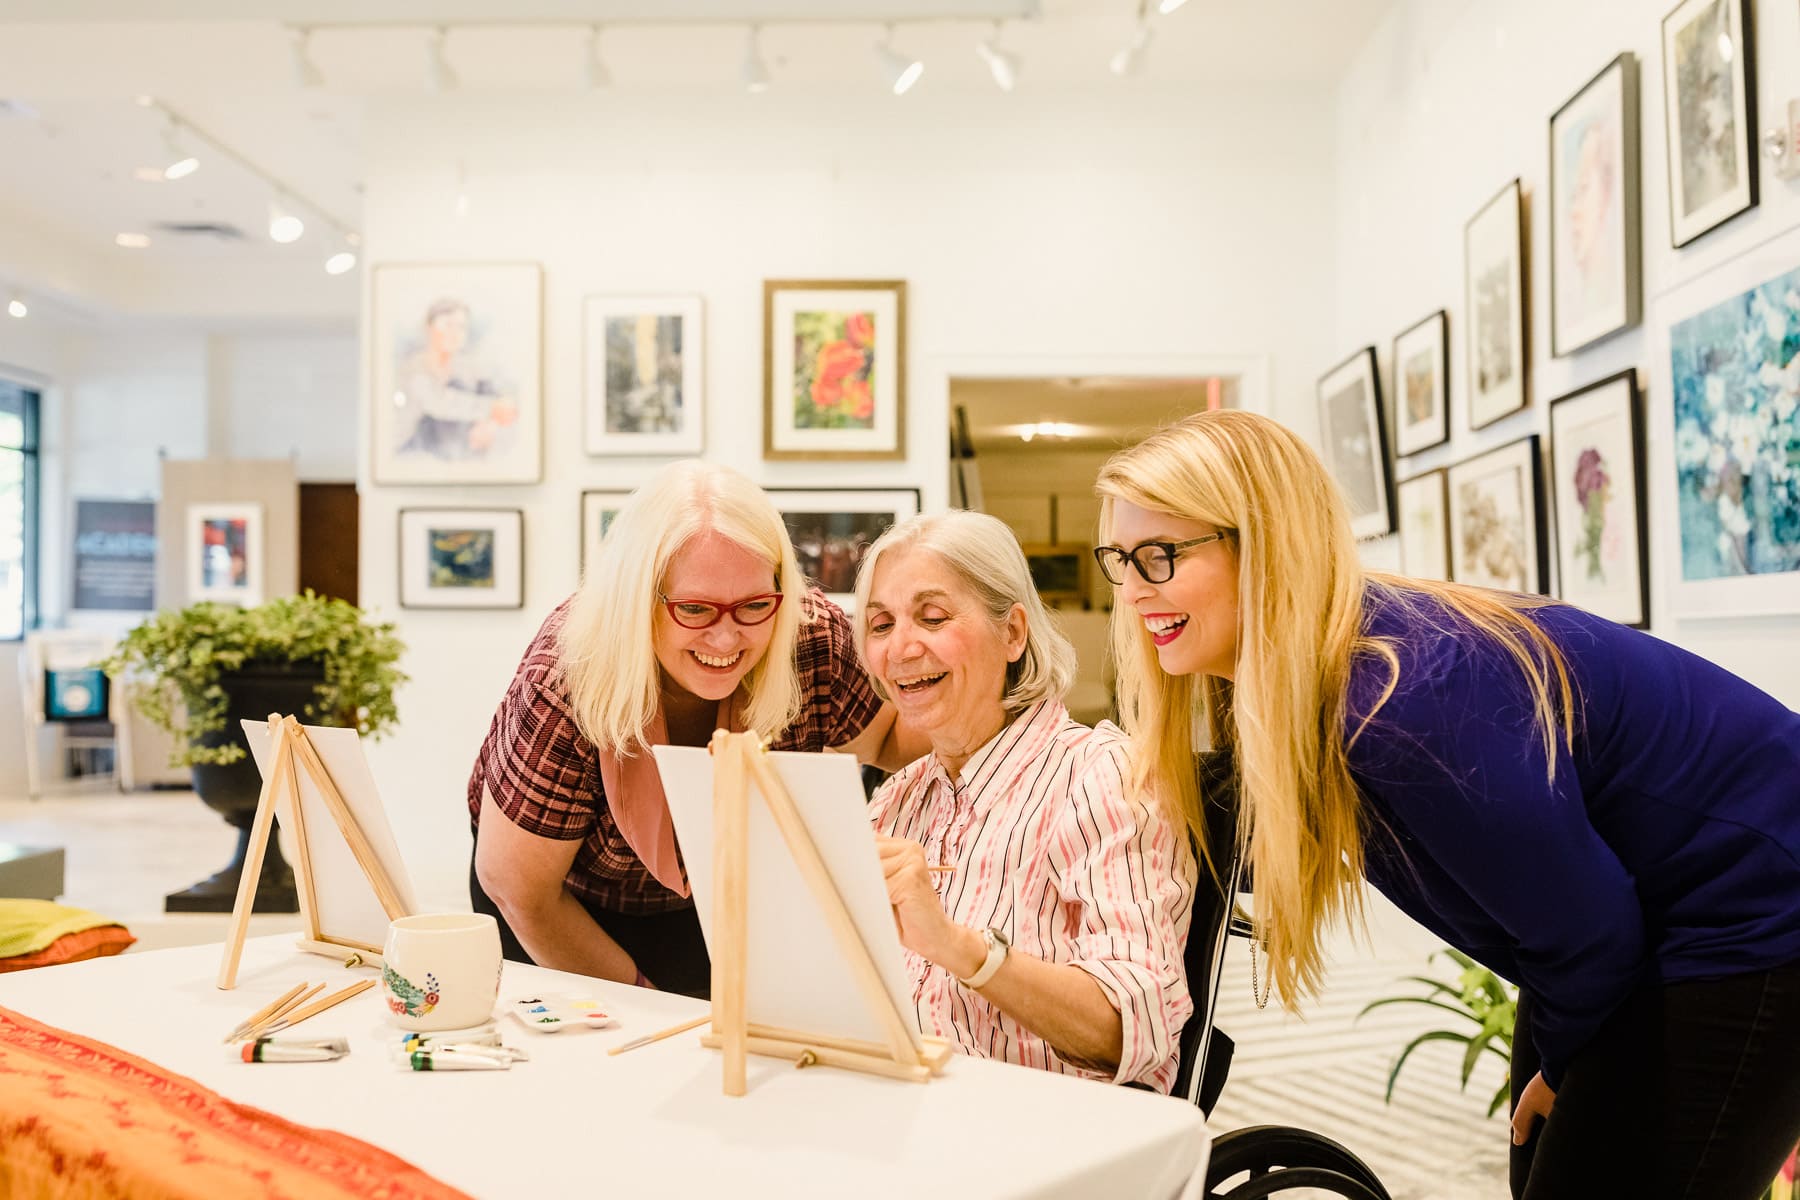 team members and resident painting in an art gallery